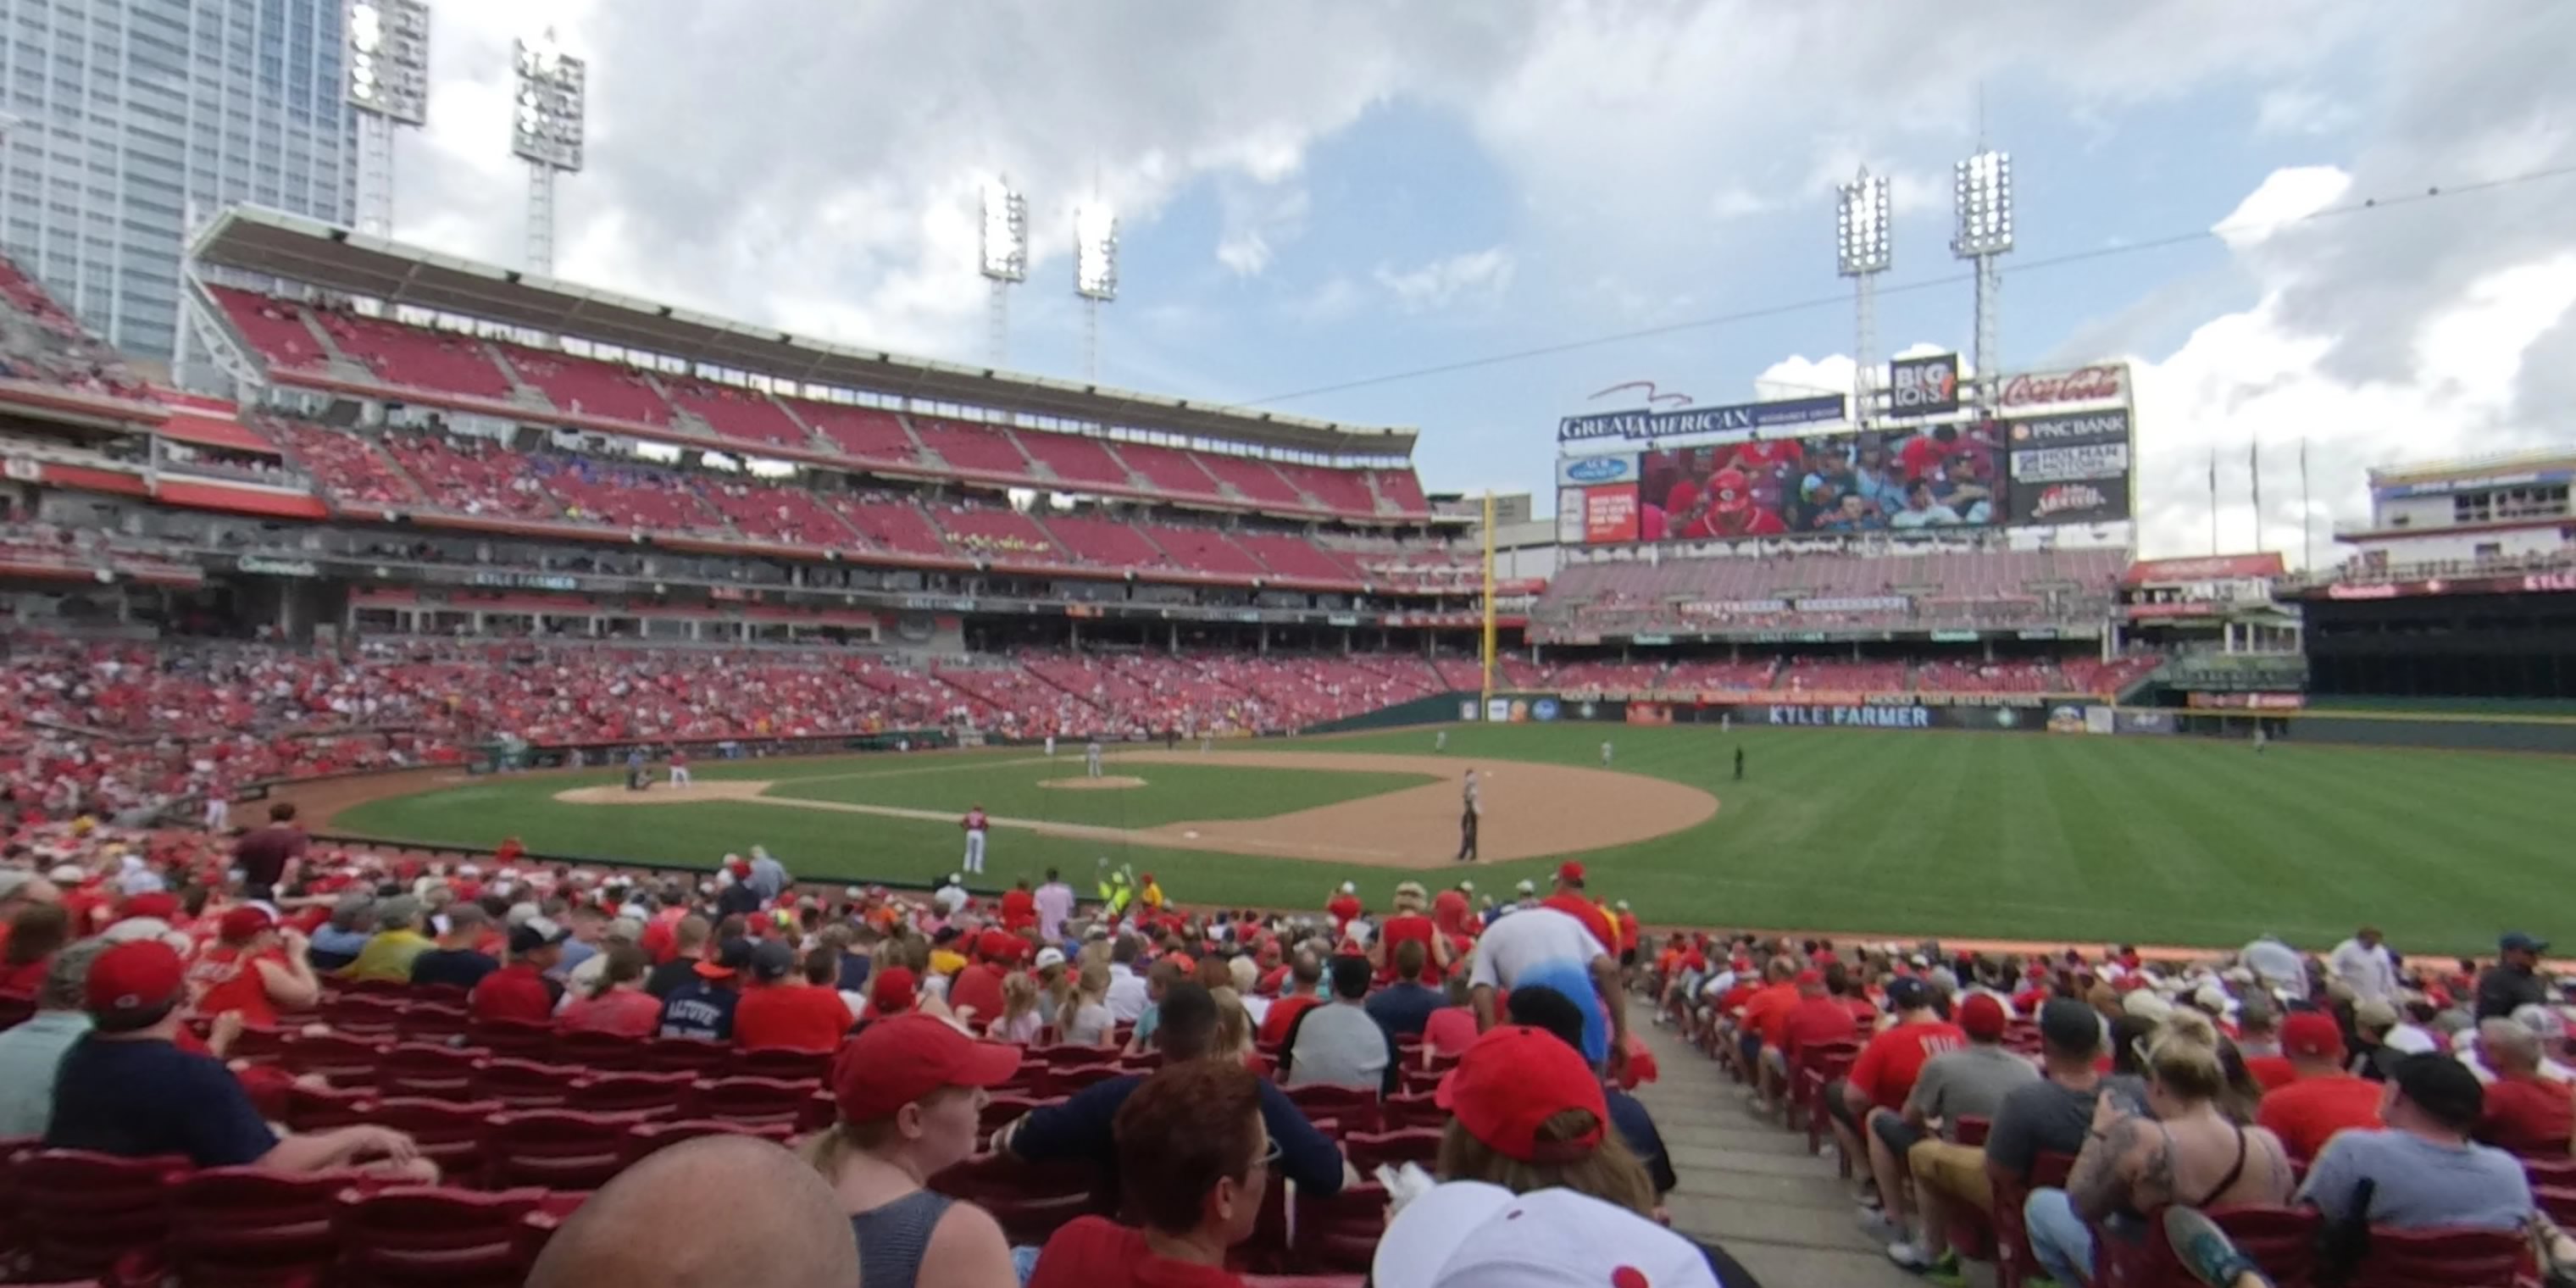 Shaded Seats at Great American Ball Park - Reds Tickets in Shade